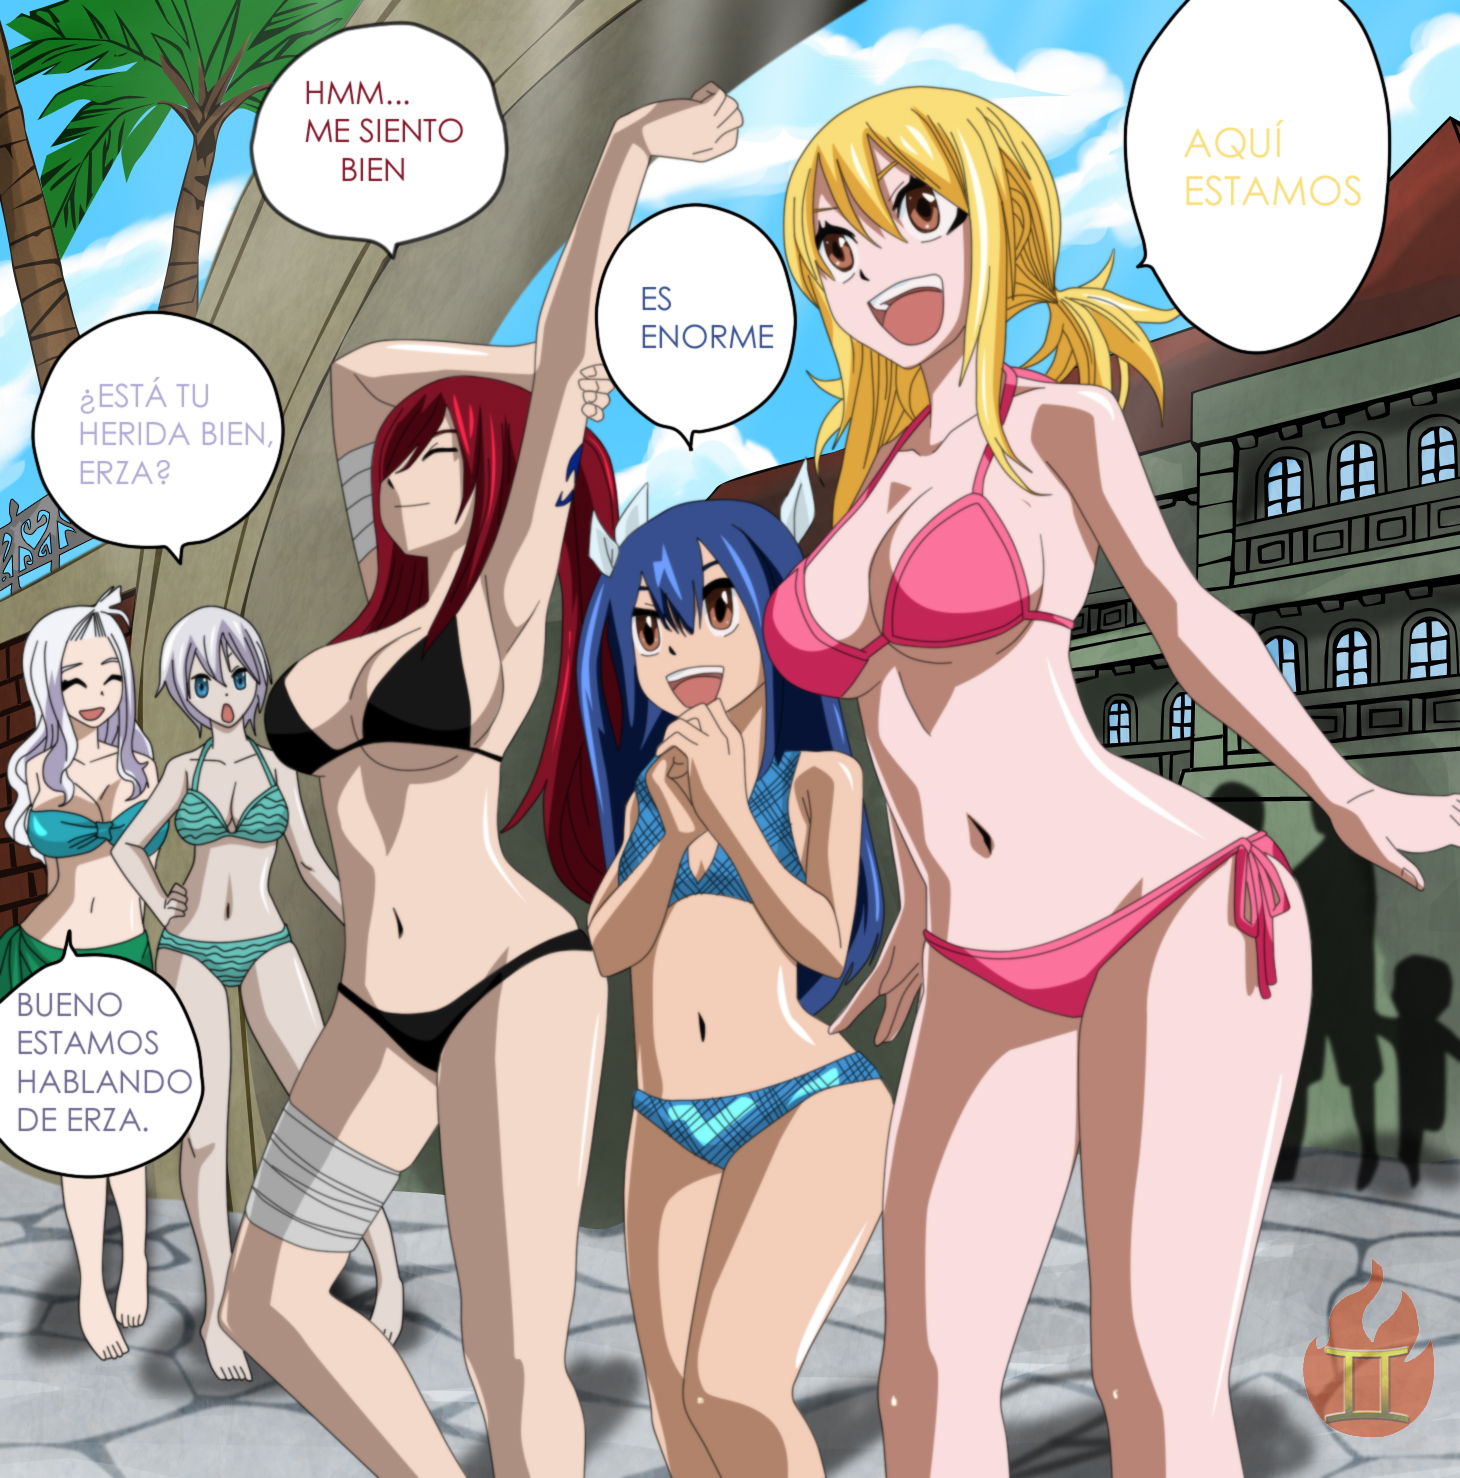 Fairy Tail Hentai Color